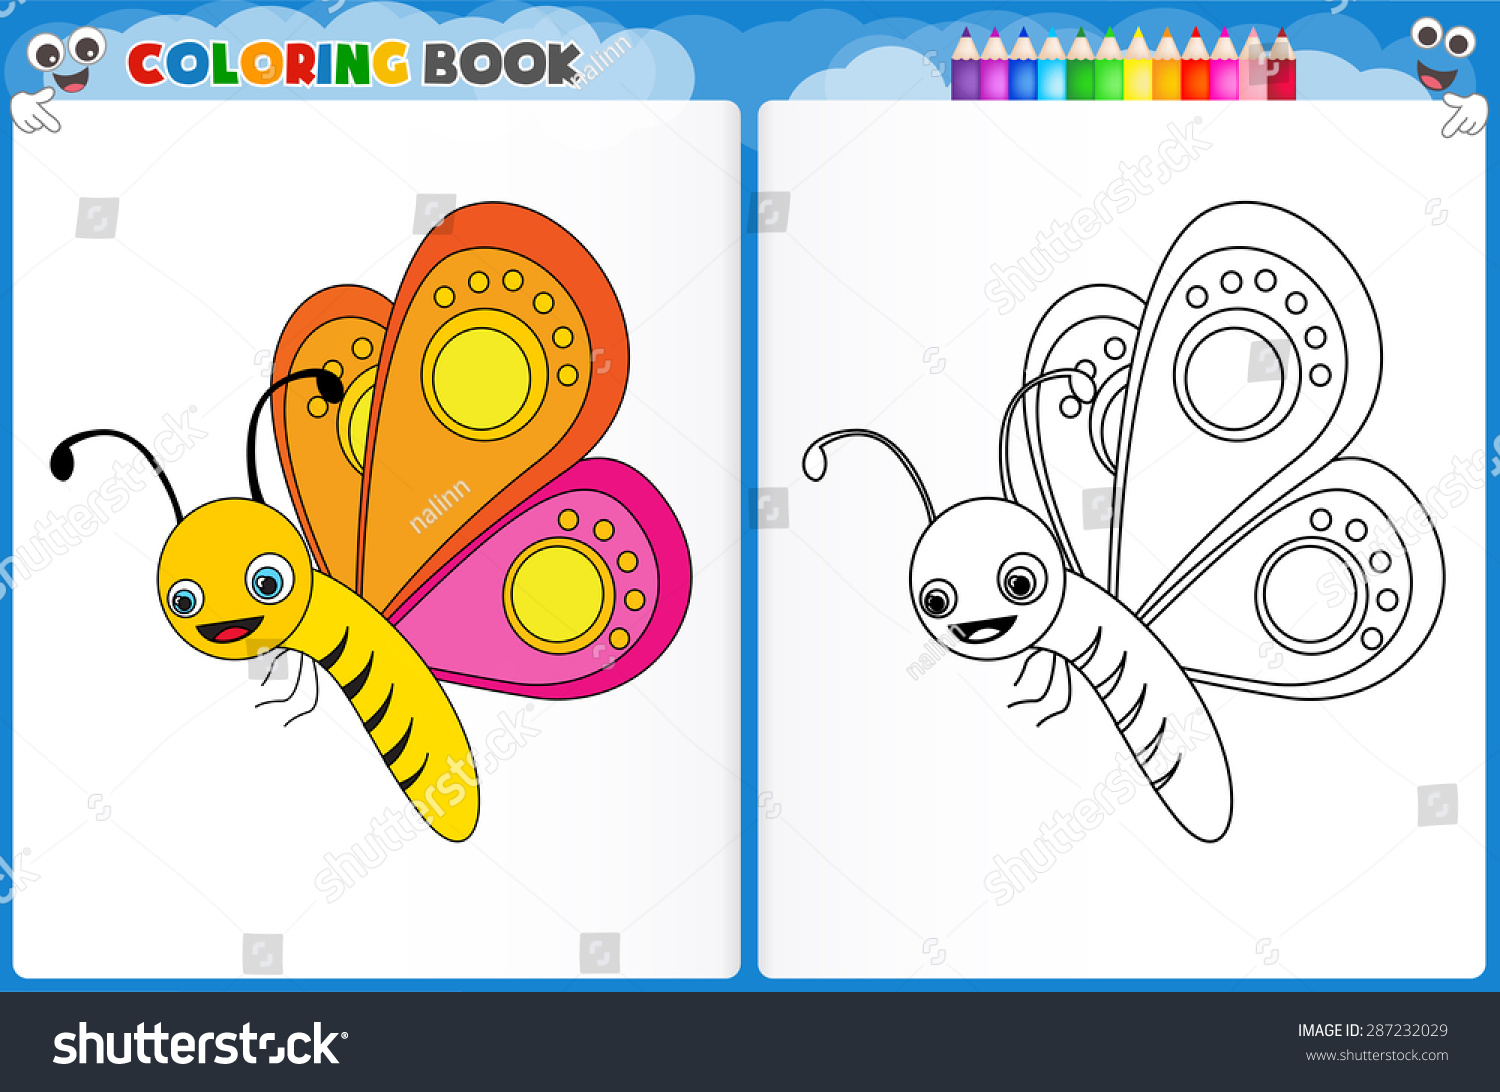 Coloring Page Butterfly Colorful Sample Printable Stock Vector ...